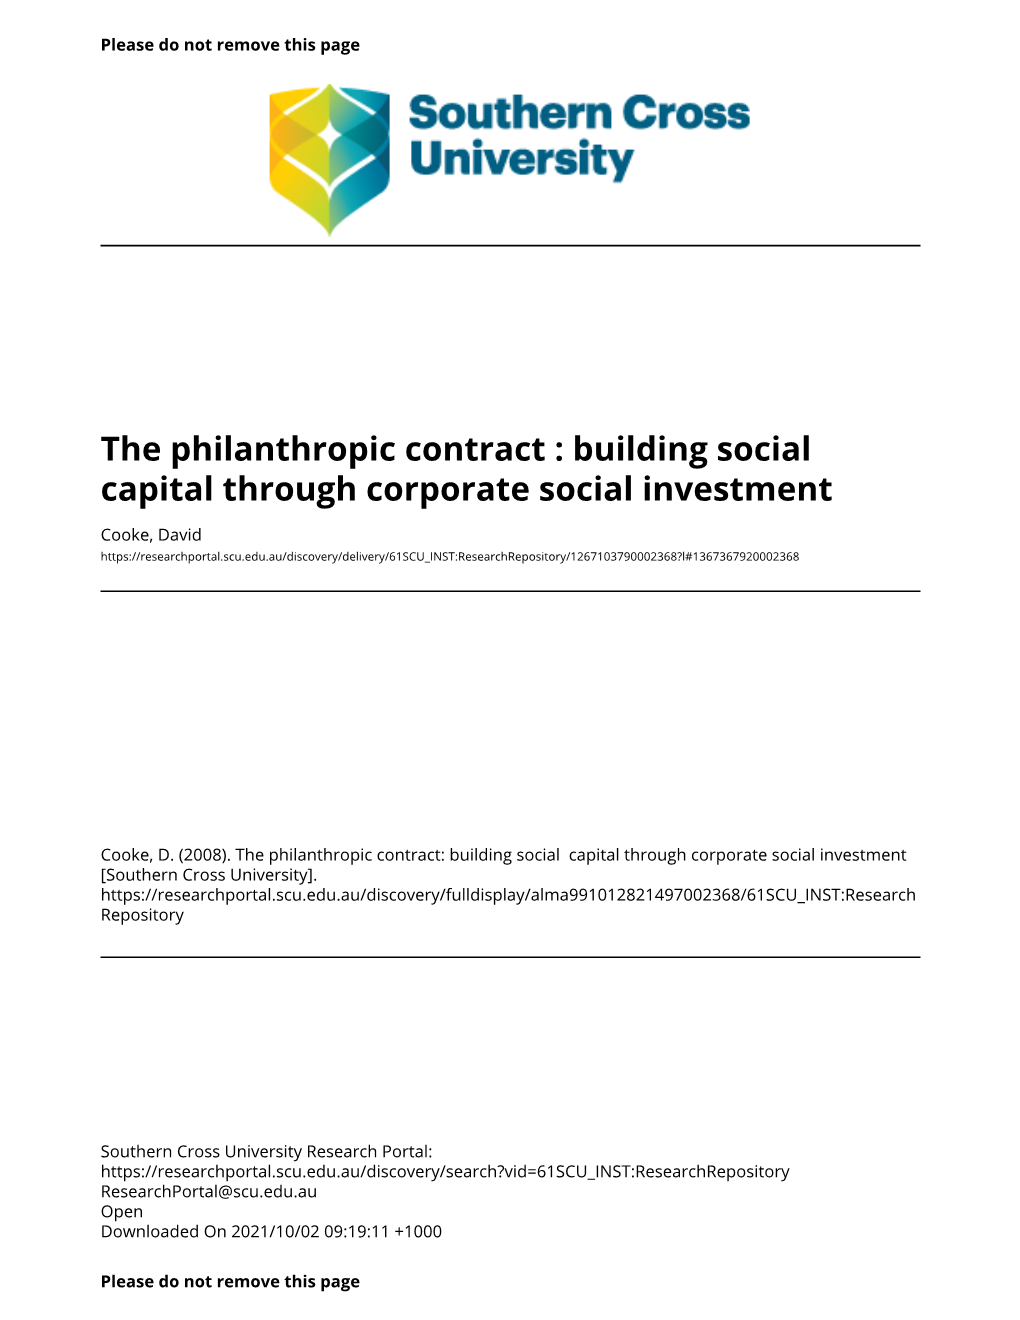 The Philanthropic Contract : Building Social Capital Through Corporate Social Investment